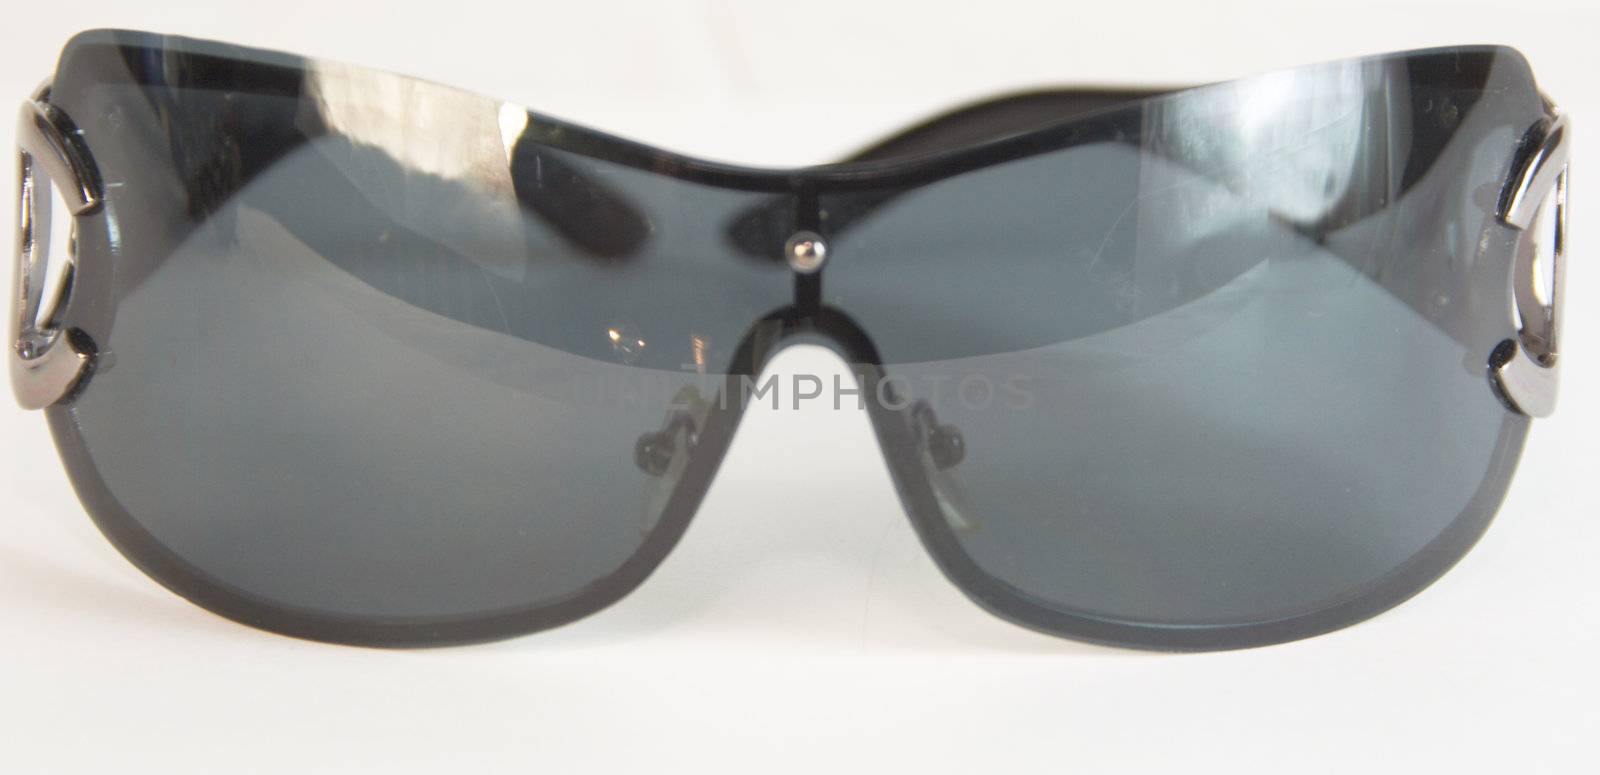 Black glasses for protection against the sun by Dominator